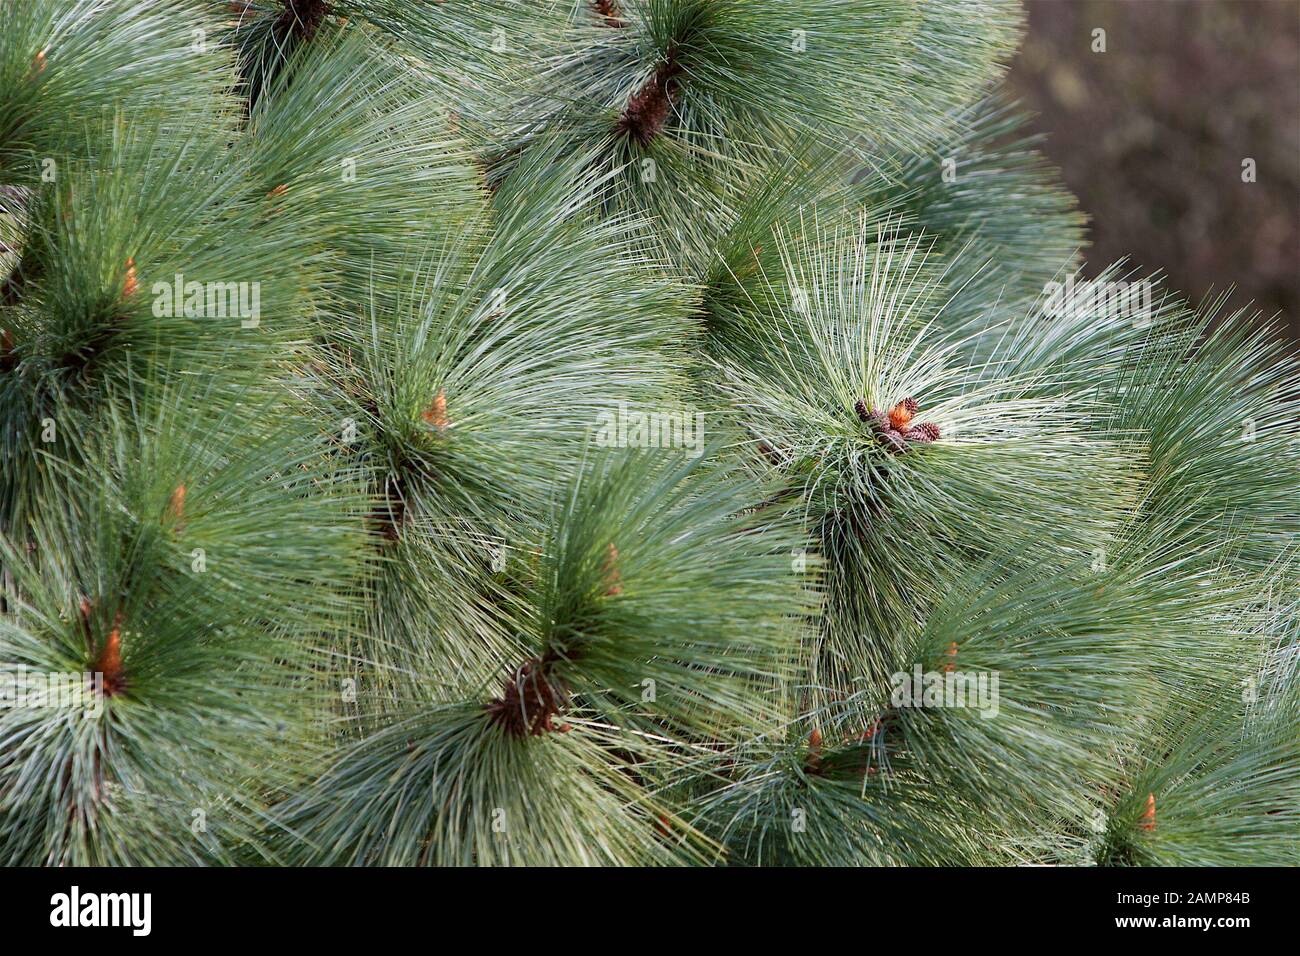 Close-up shot of the needles on a pine tree. Stock Photo